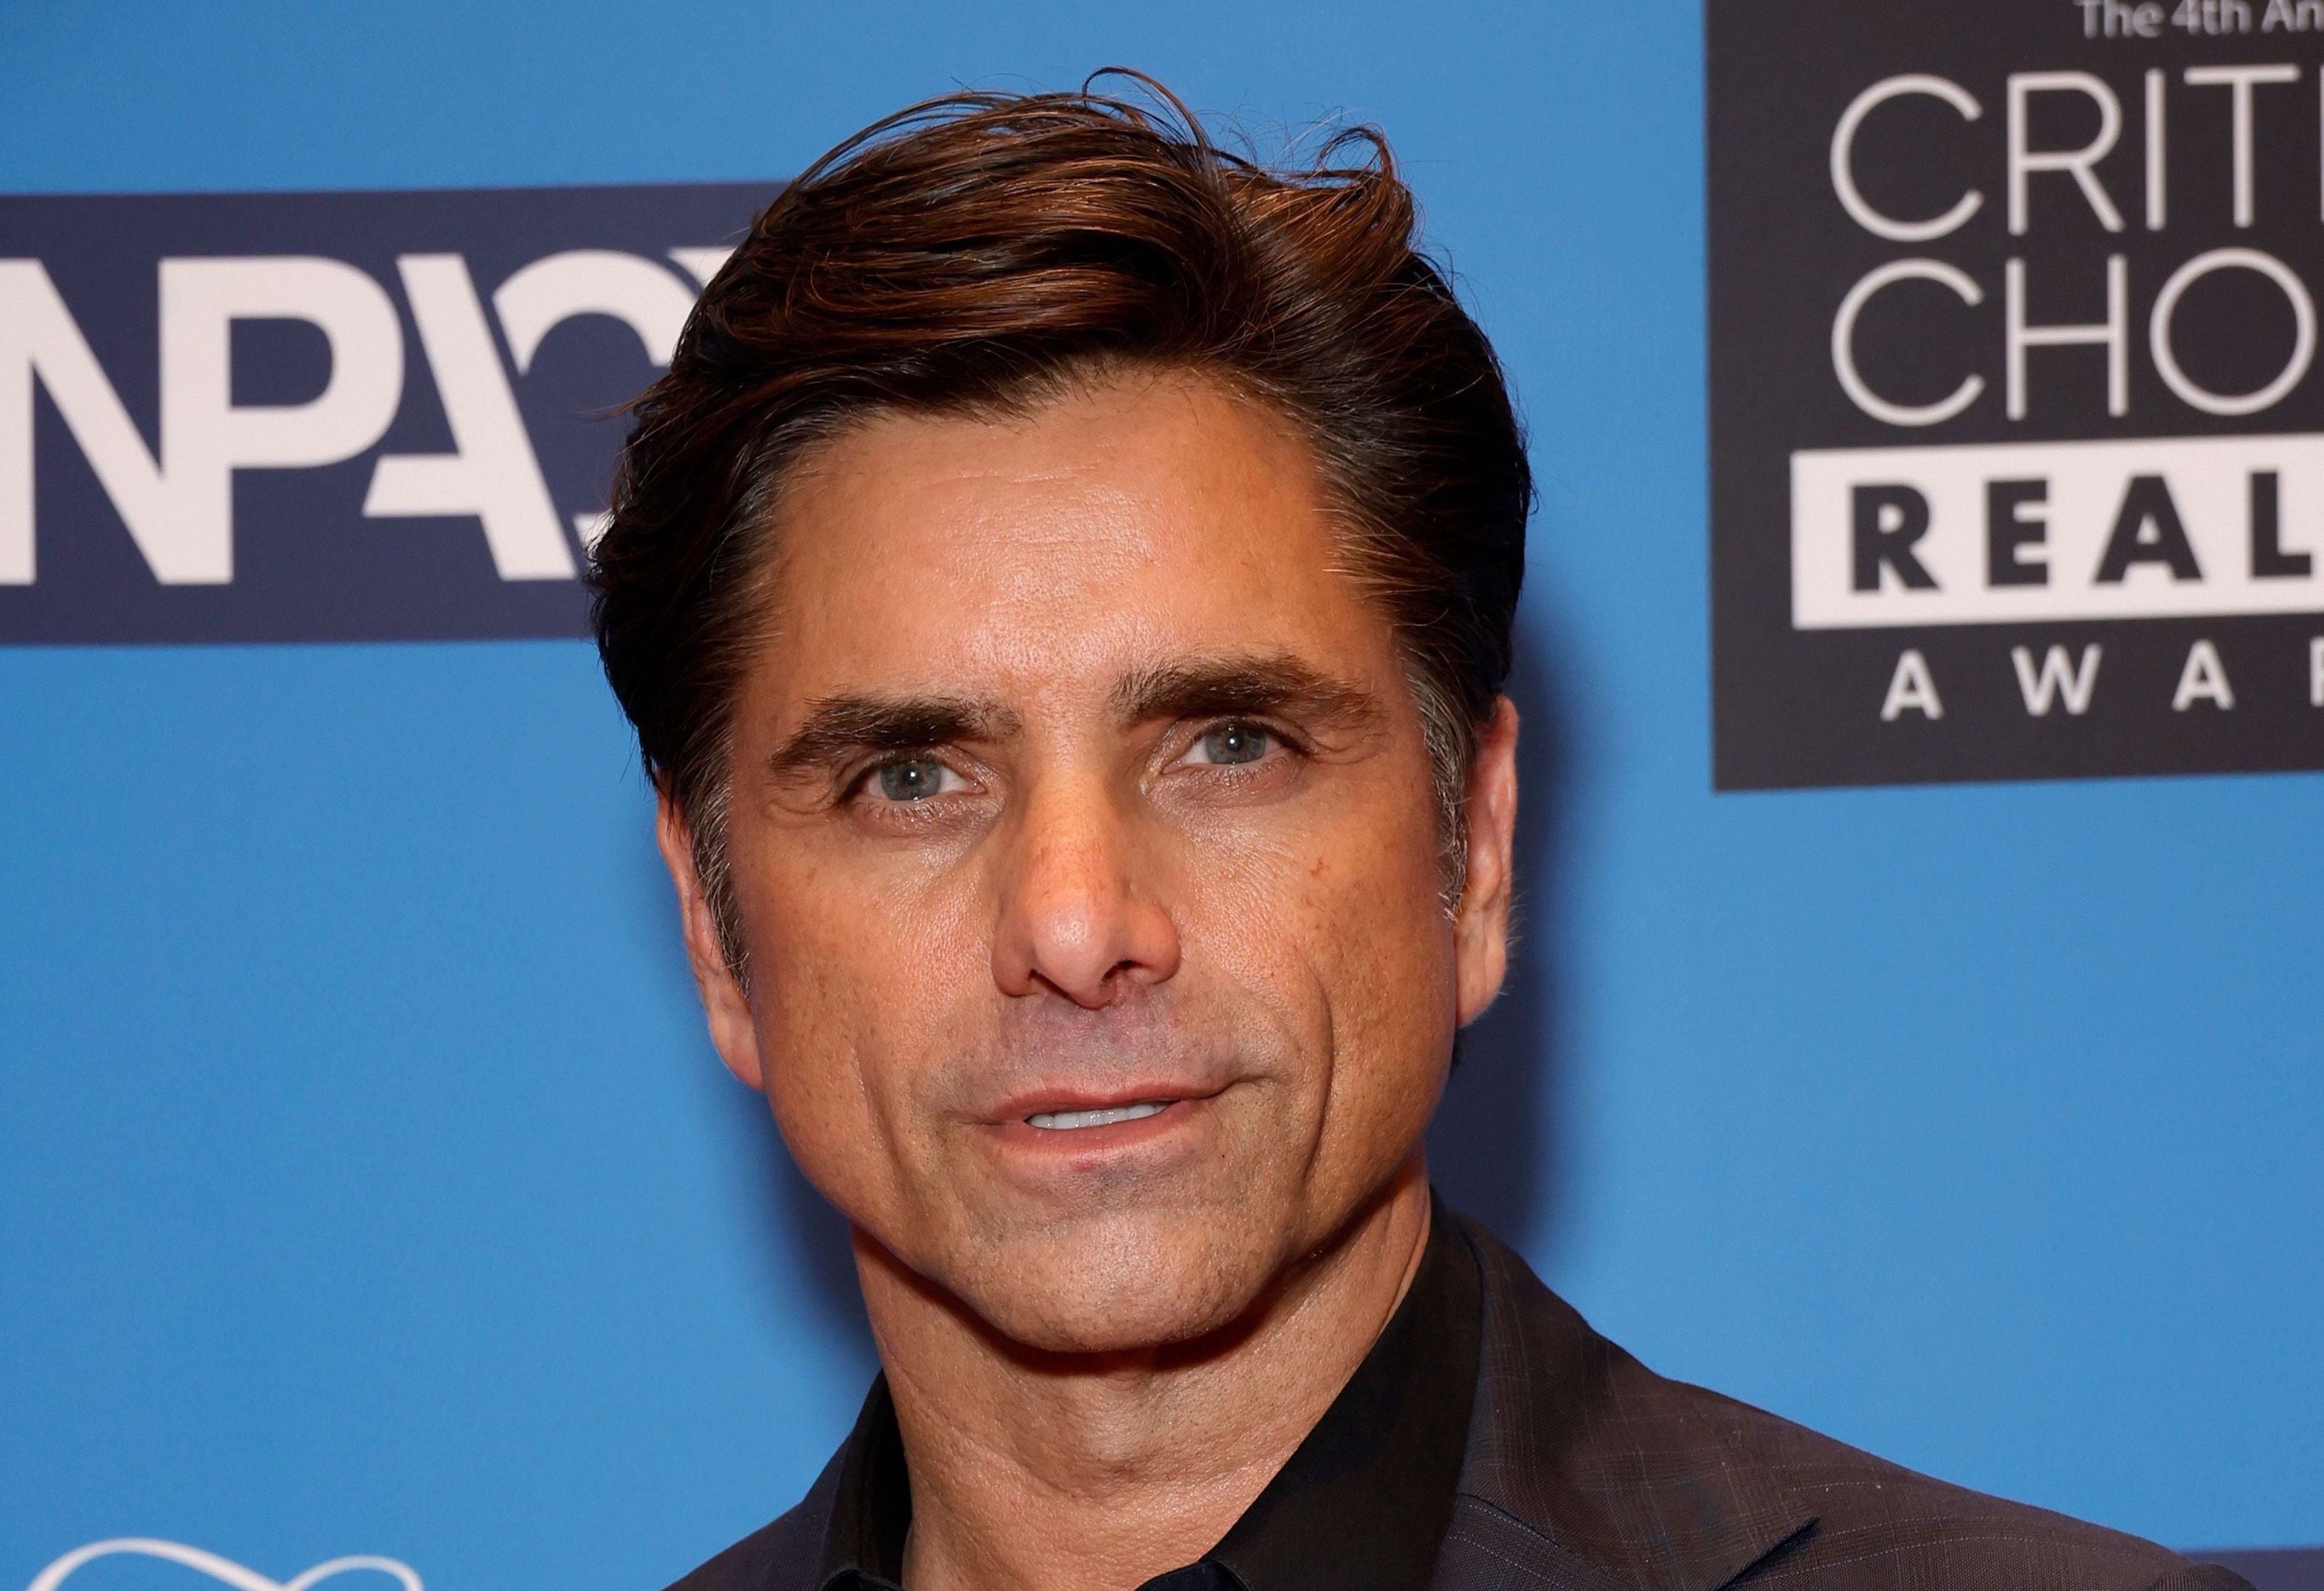 John Stamos attends the 4th Annual Critics Choice Real TV Awards at in 2022